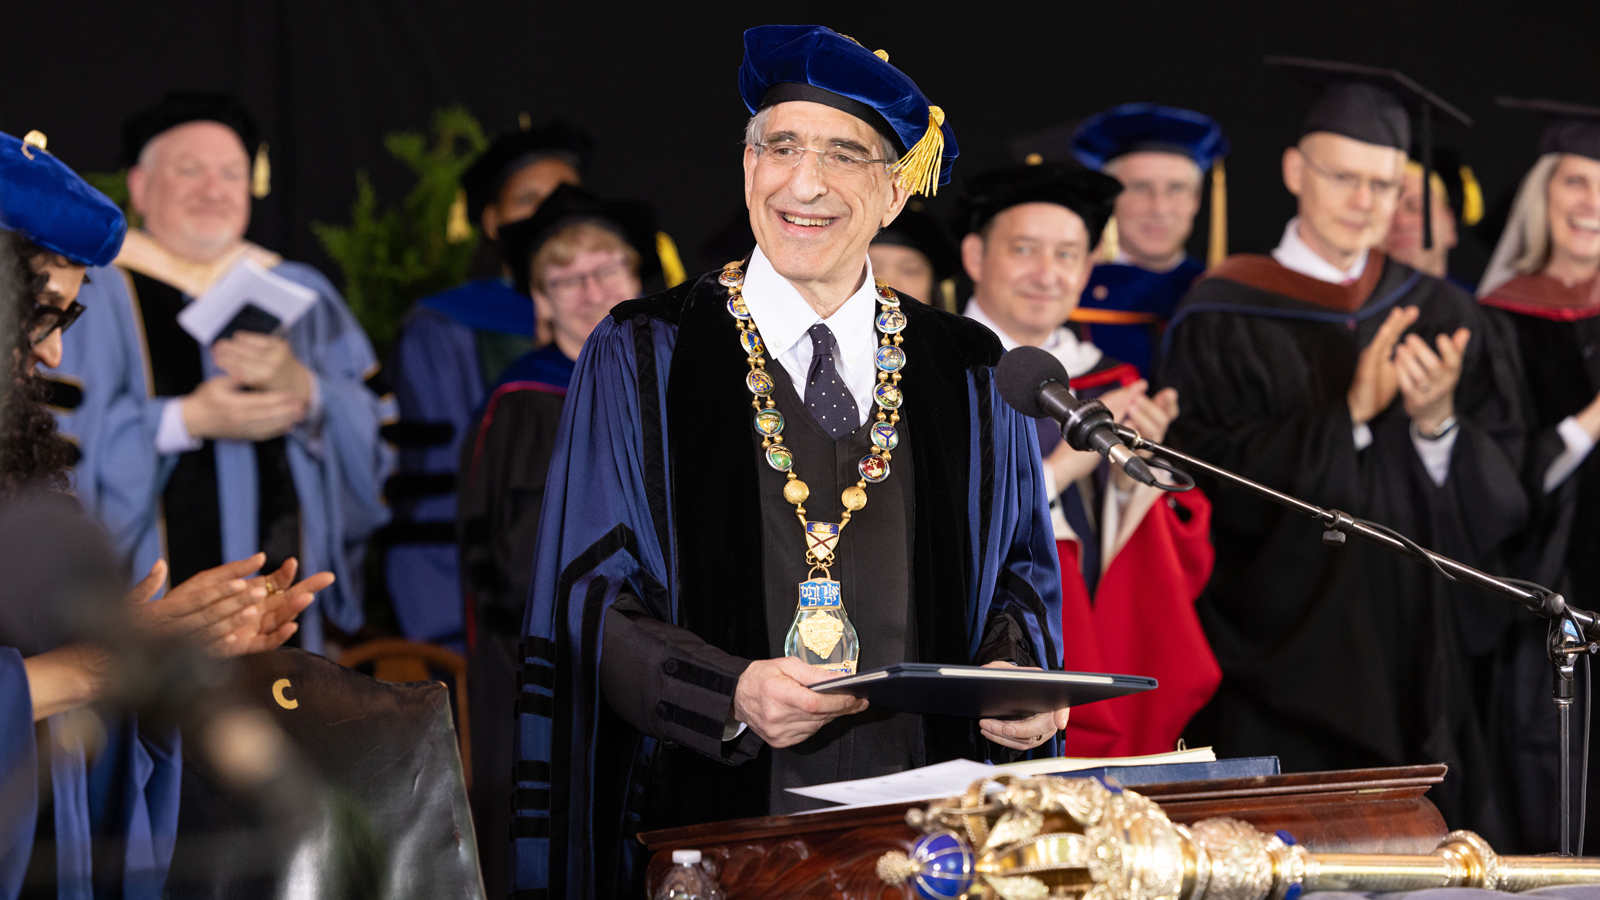 President Salovey accepting his Honorary Degree of Doctor of Humane Letters